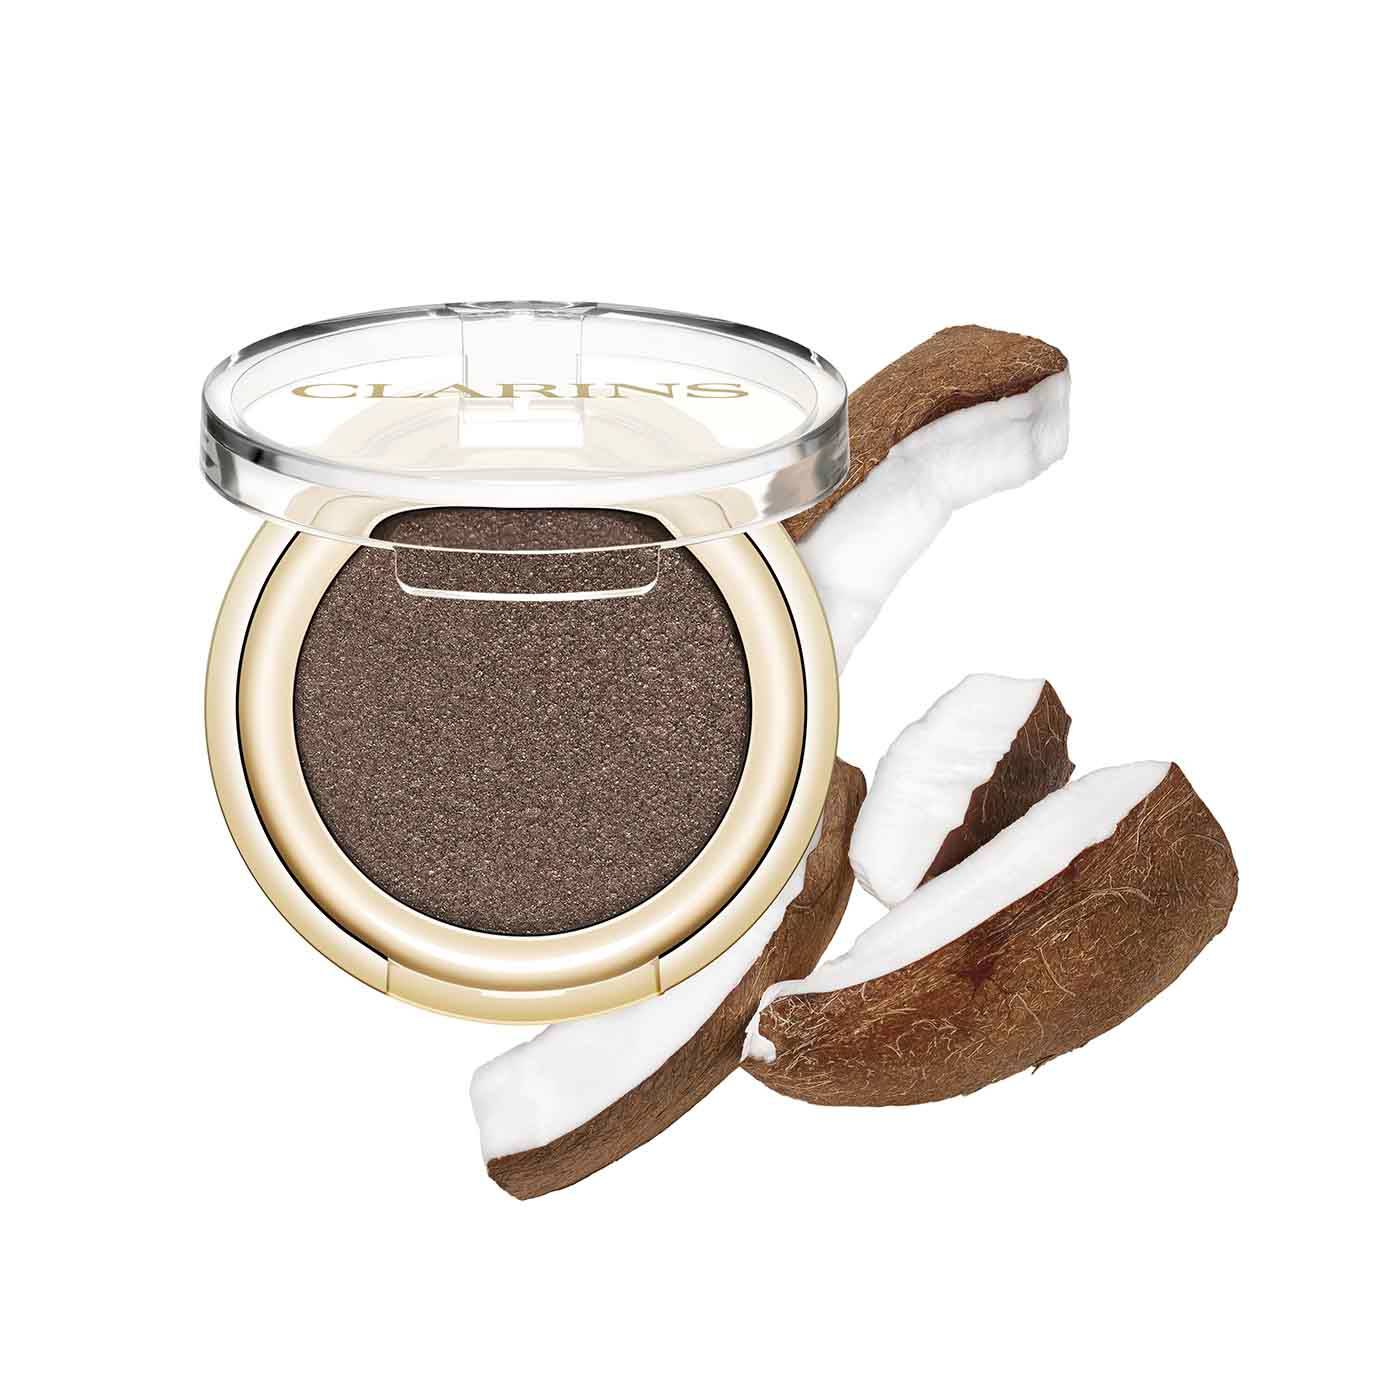 Clarins' Latest Eyeshadows—More than Simply Color | CLARINS®